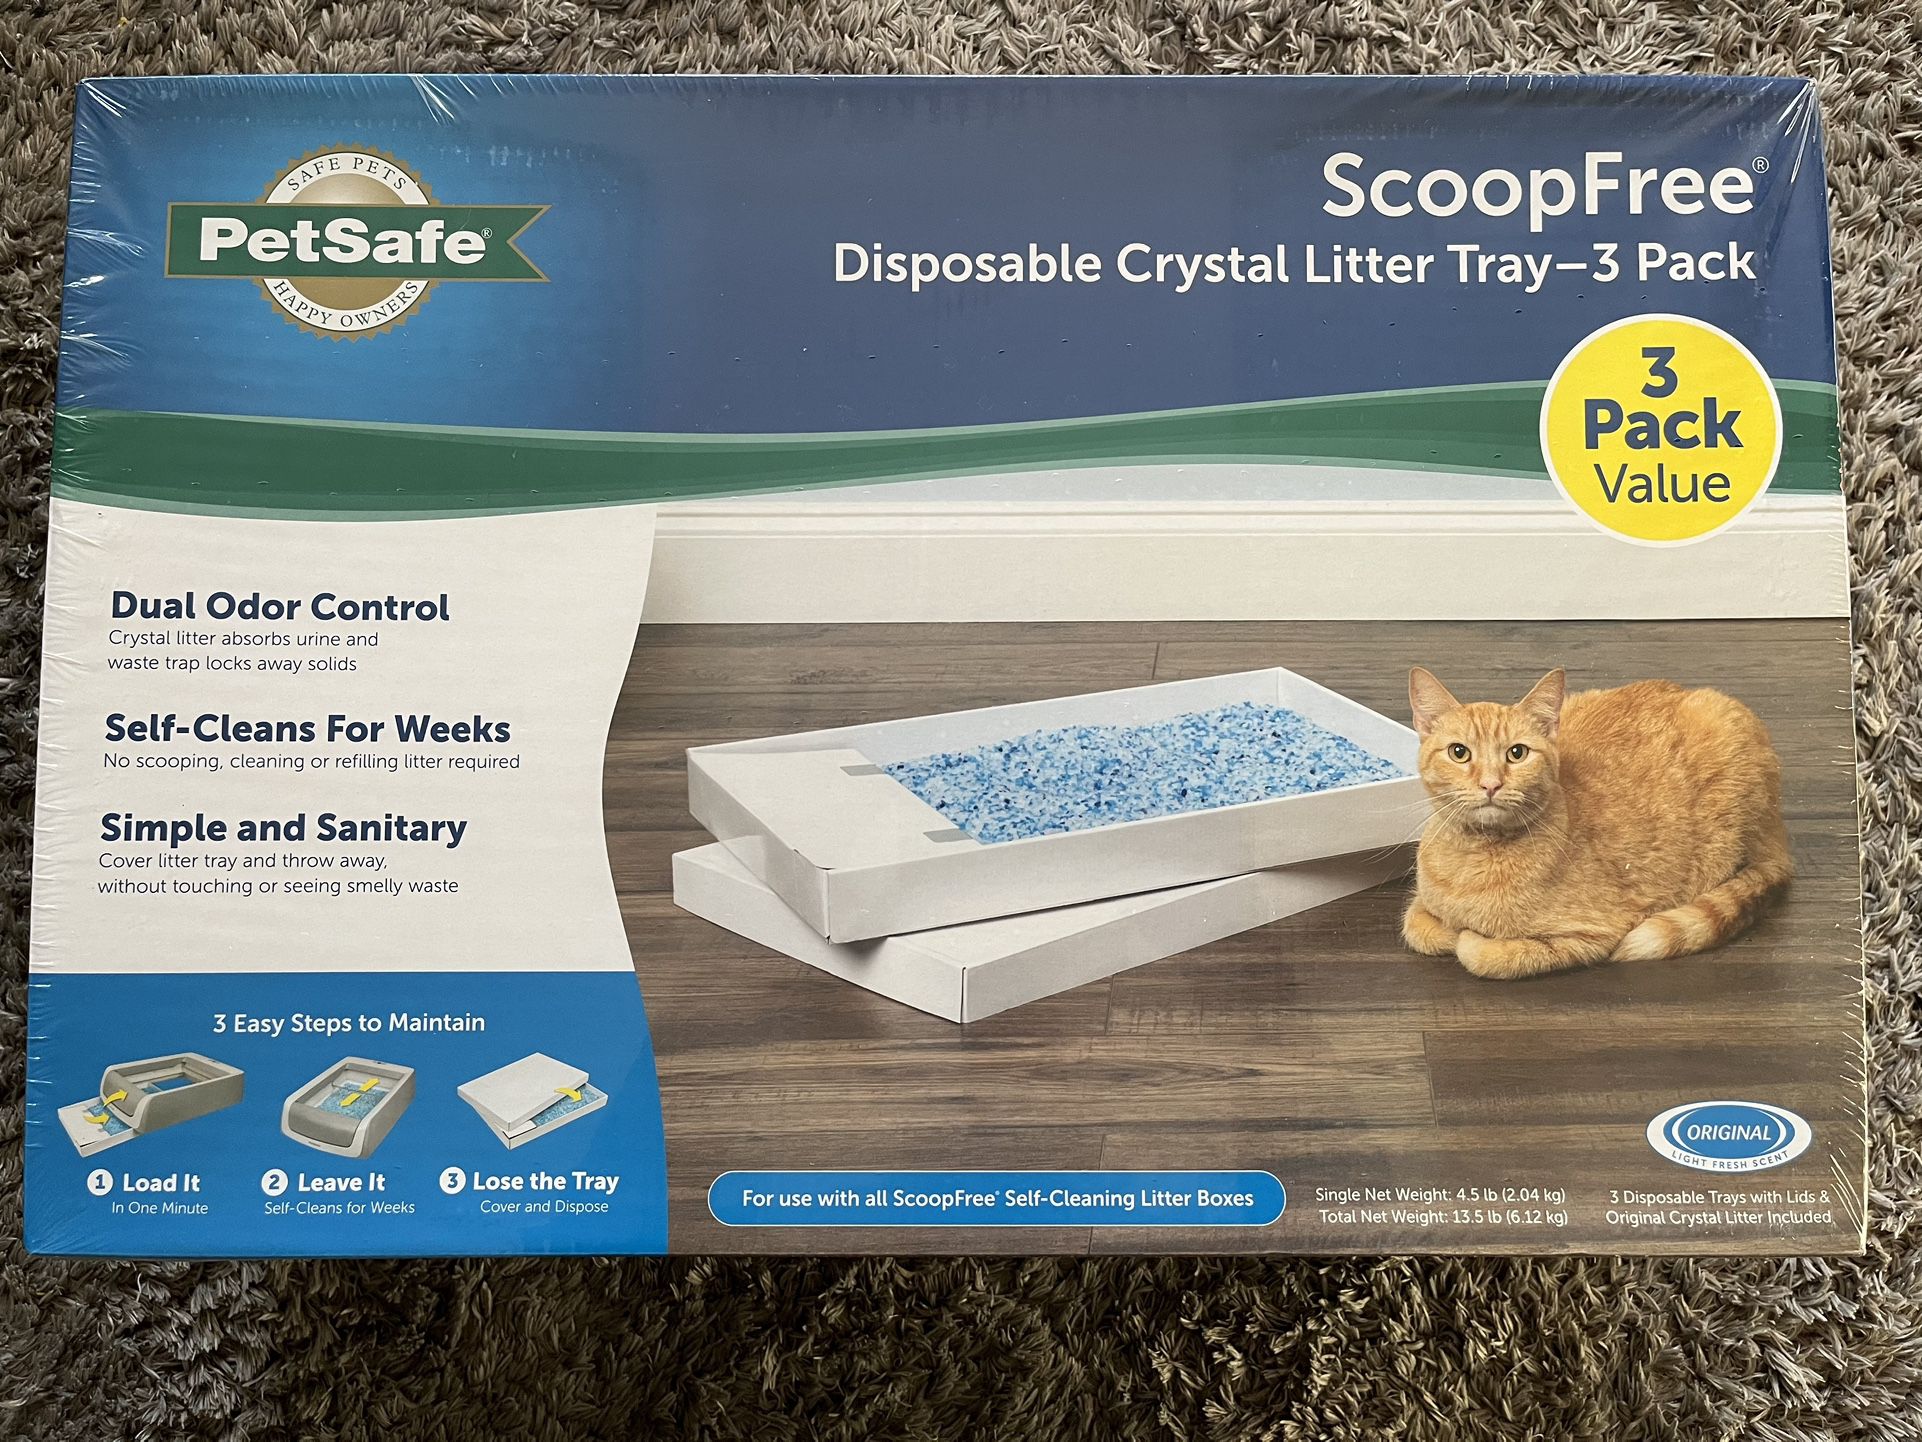 PetSafe Scoop Free Disposable Crystal Litter Tray - 3 Pack